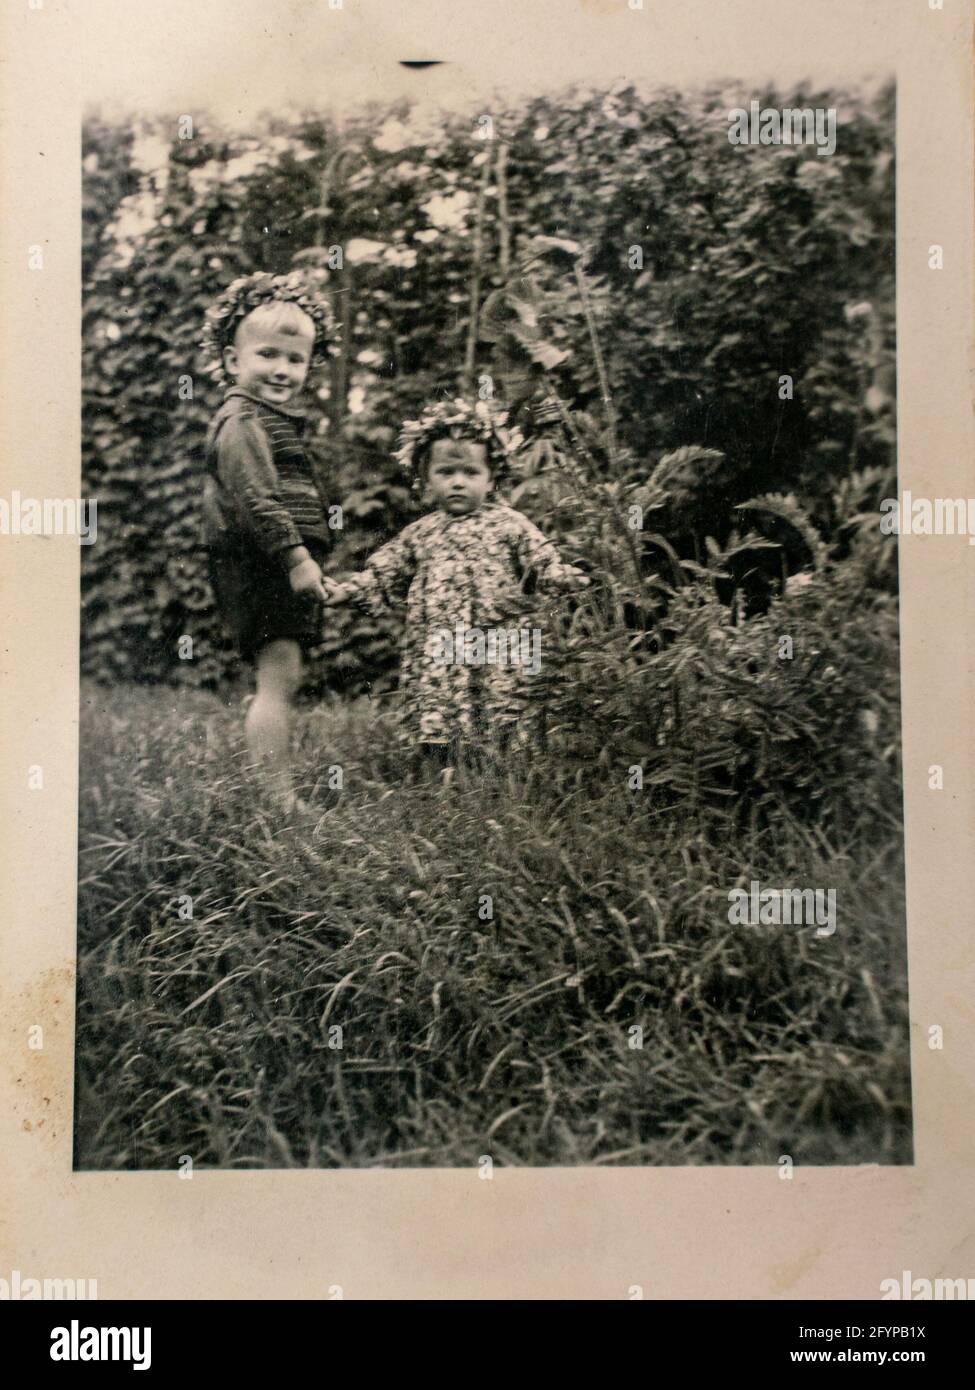 Germany - CIRCA 1930s: Photo of two small kids standing in garden at summer. Vintage archive Art Deco era photography Stock Photo